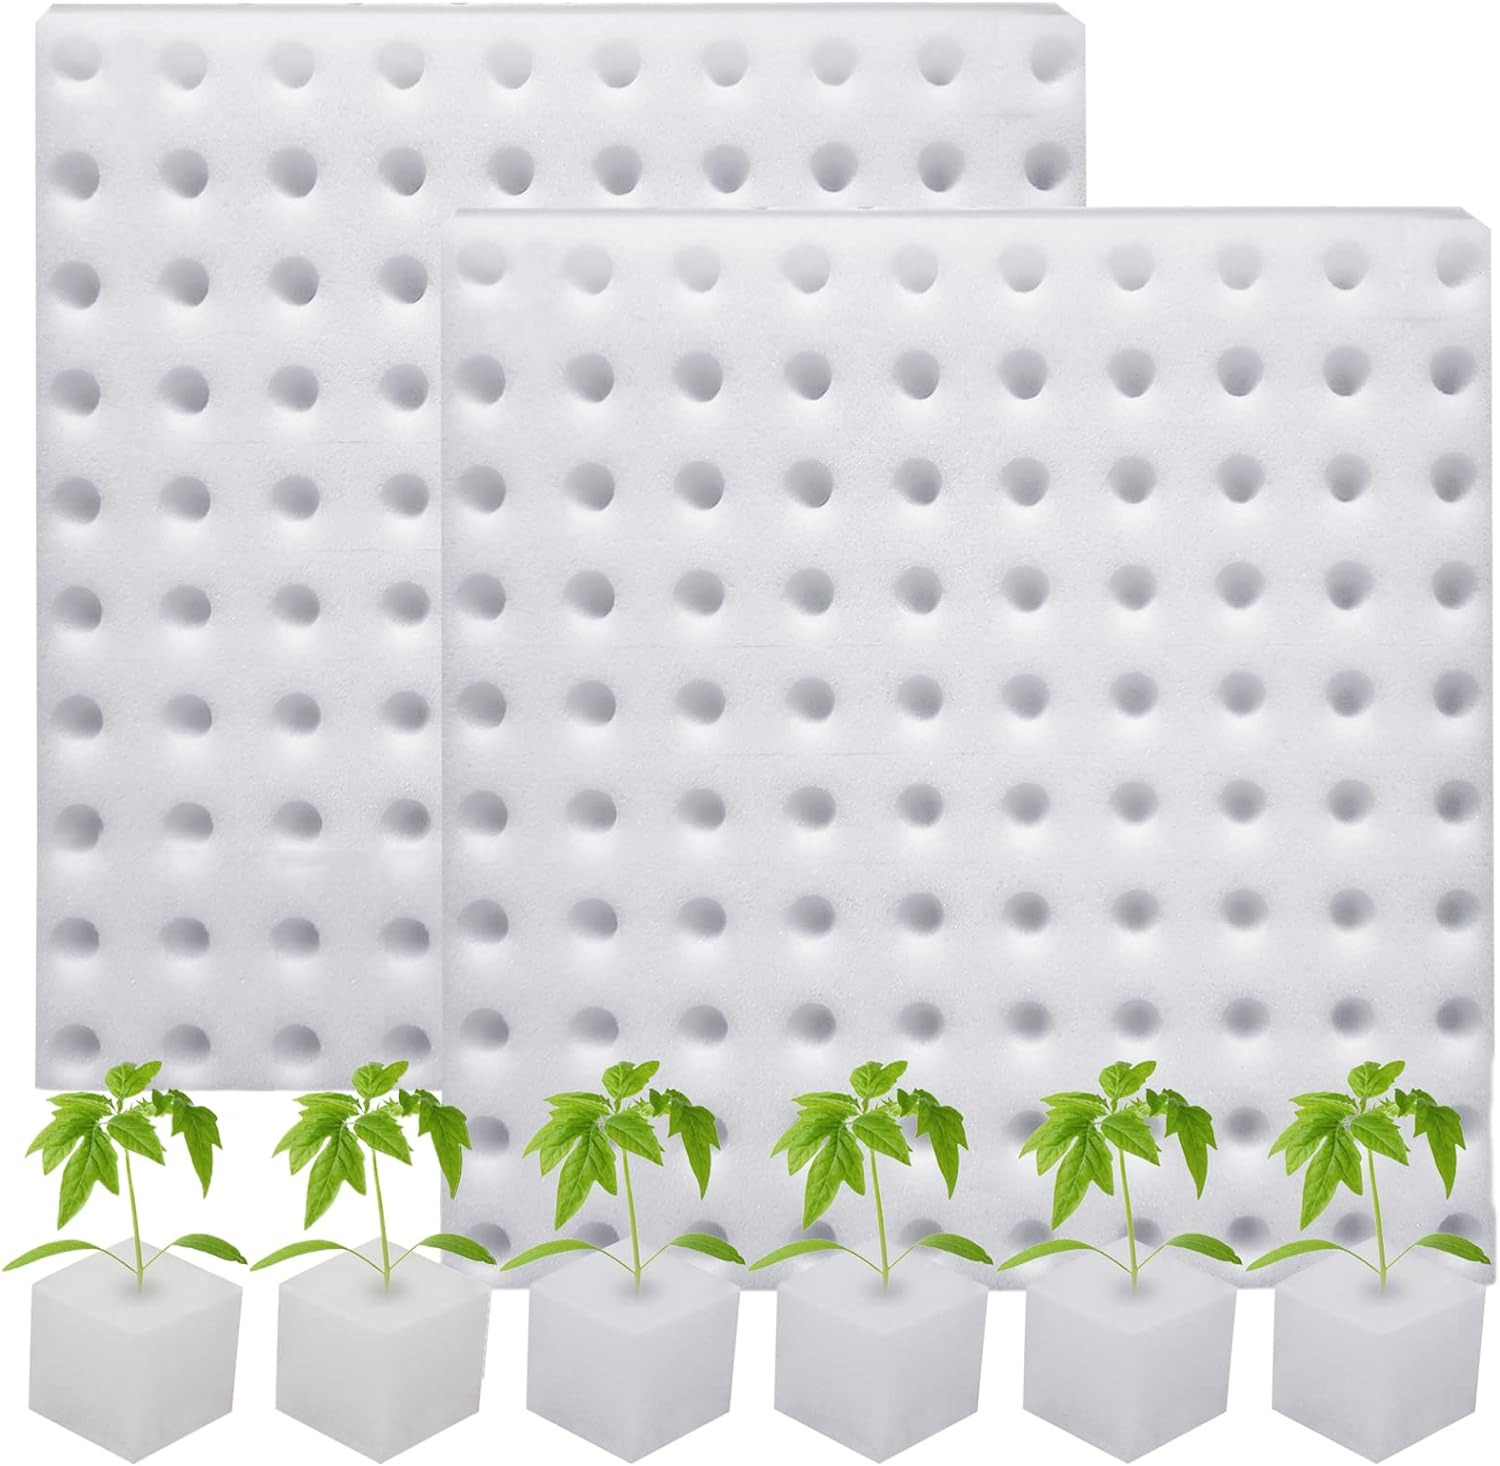 XIDAJIE 200 Pcs Hydroponic Sponges Planting Gardening Tool Soilless Cultivation 